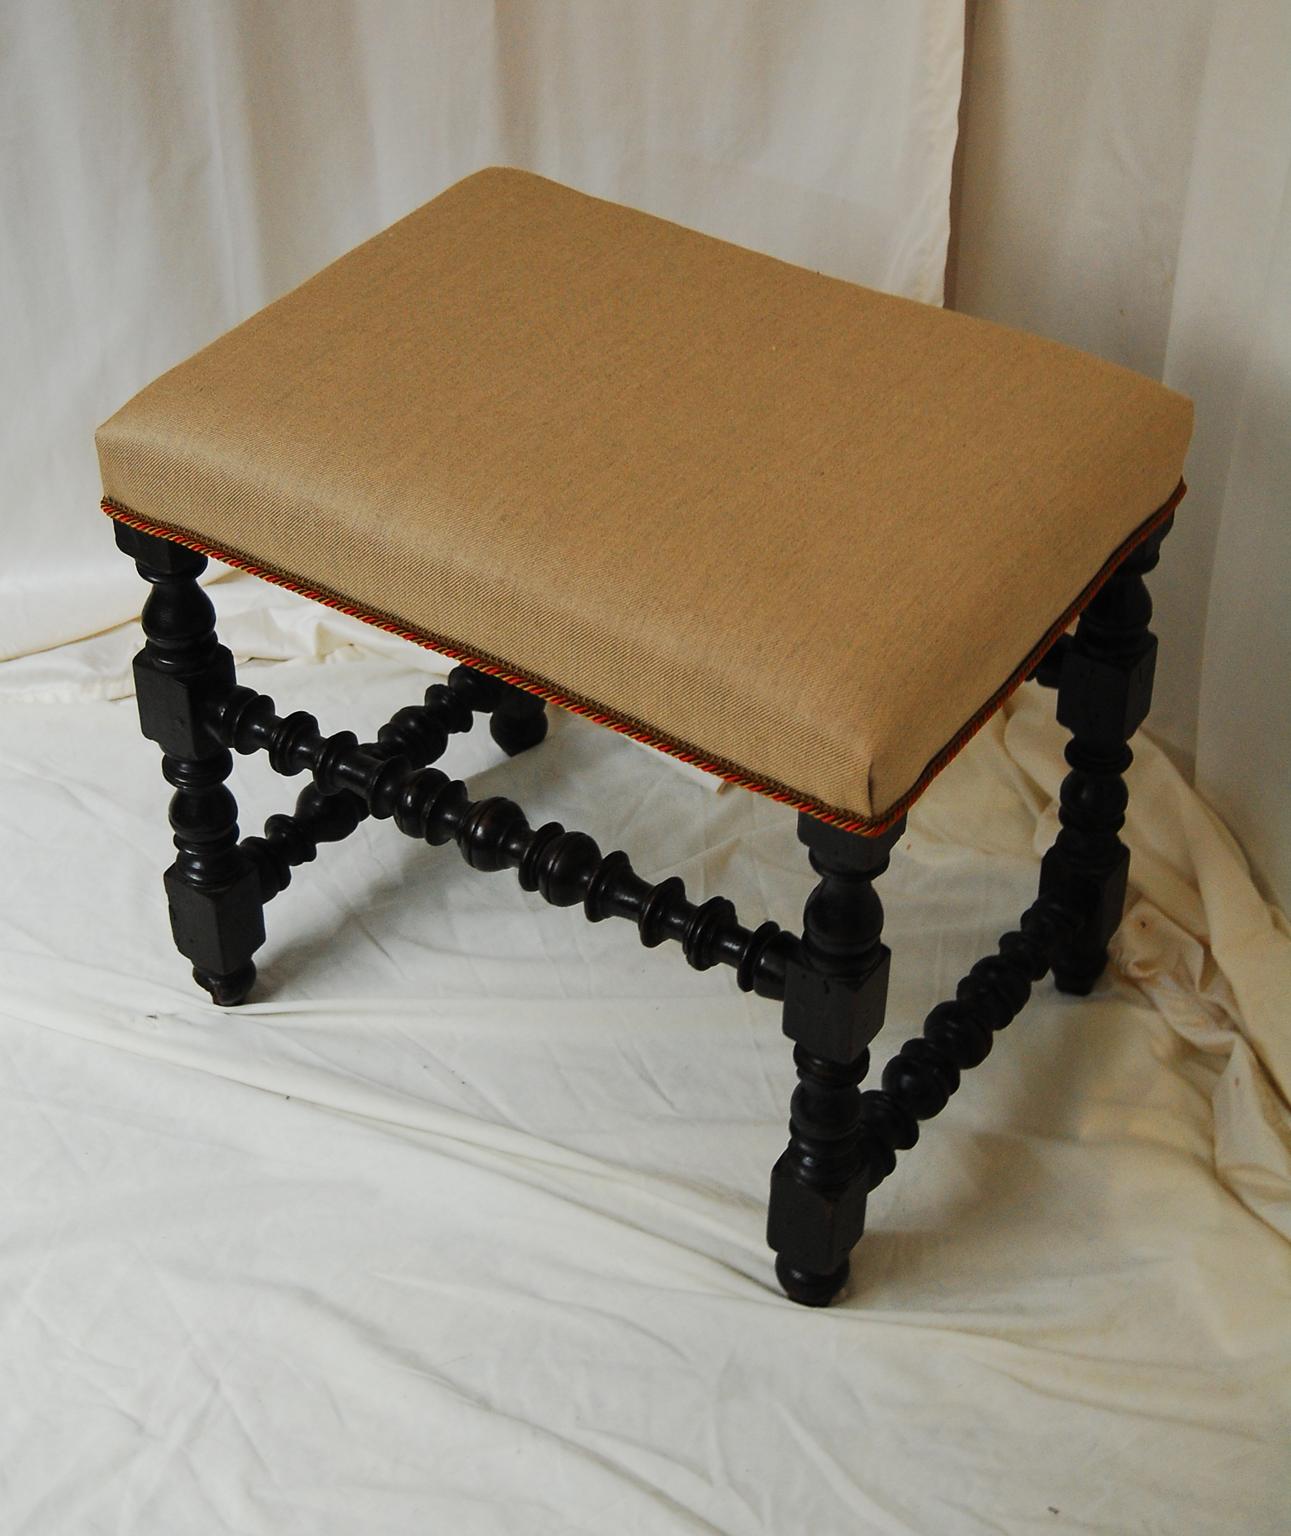 English William and Mary period turned leg upholstered stool with four boldly hand turned stretchers. and legs. This rare stool retains its original patination and is in excellent condition. One leg has 1/2